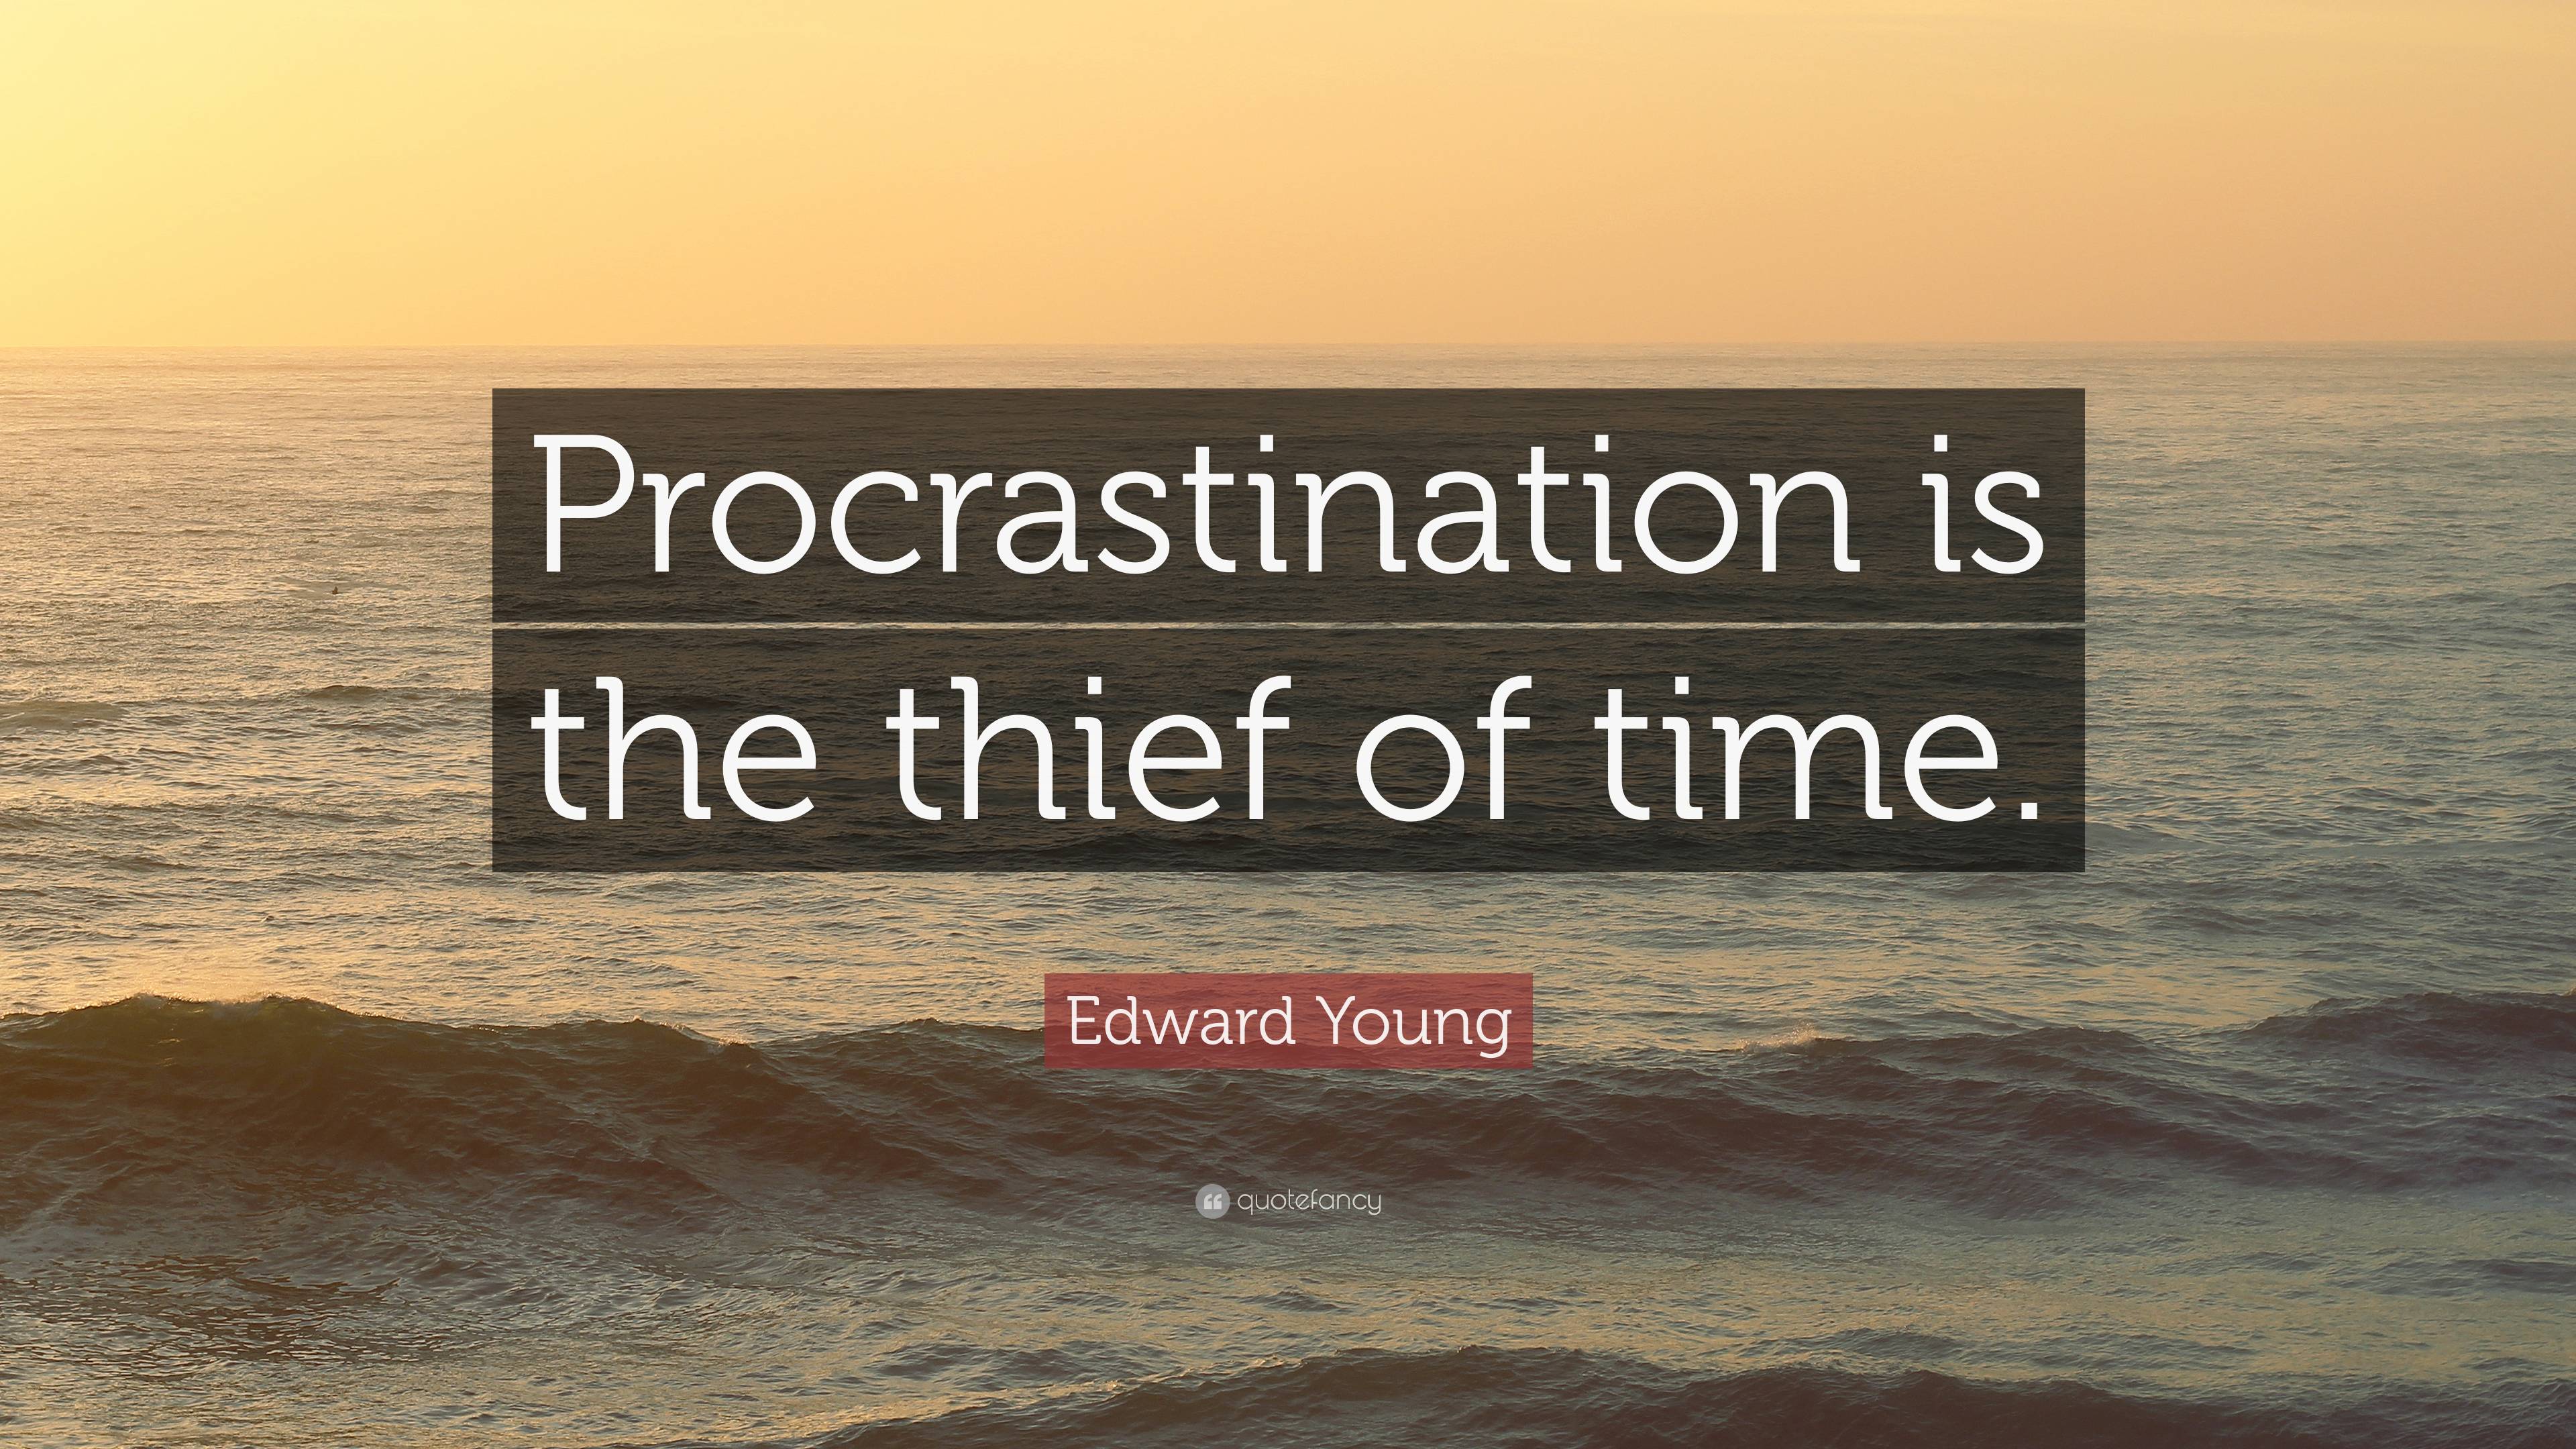 essay on procrastination is the thief of time